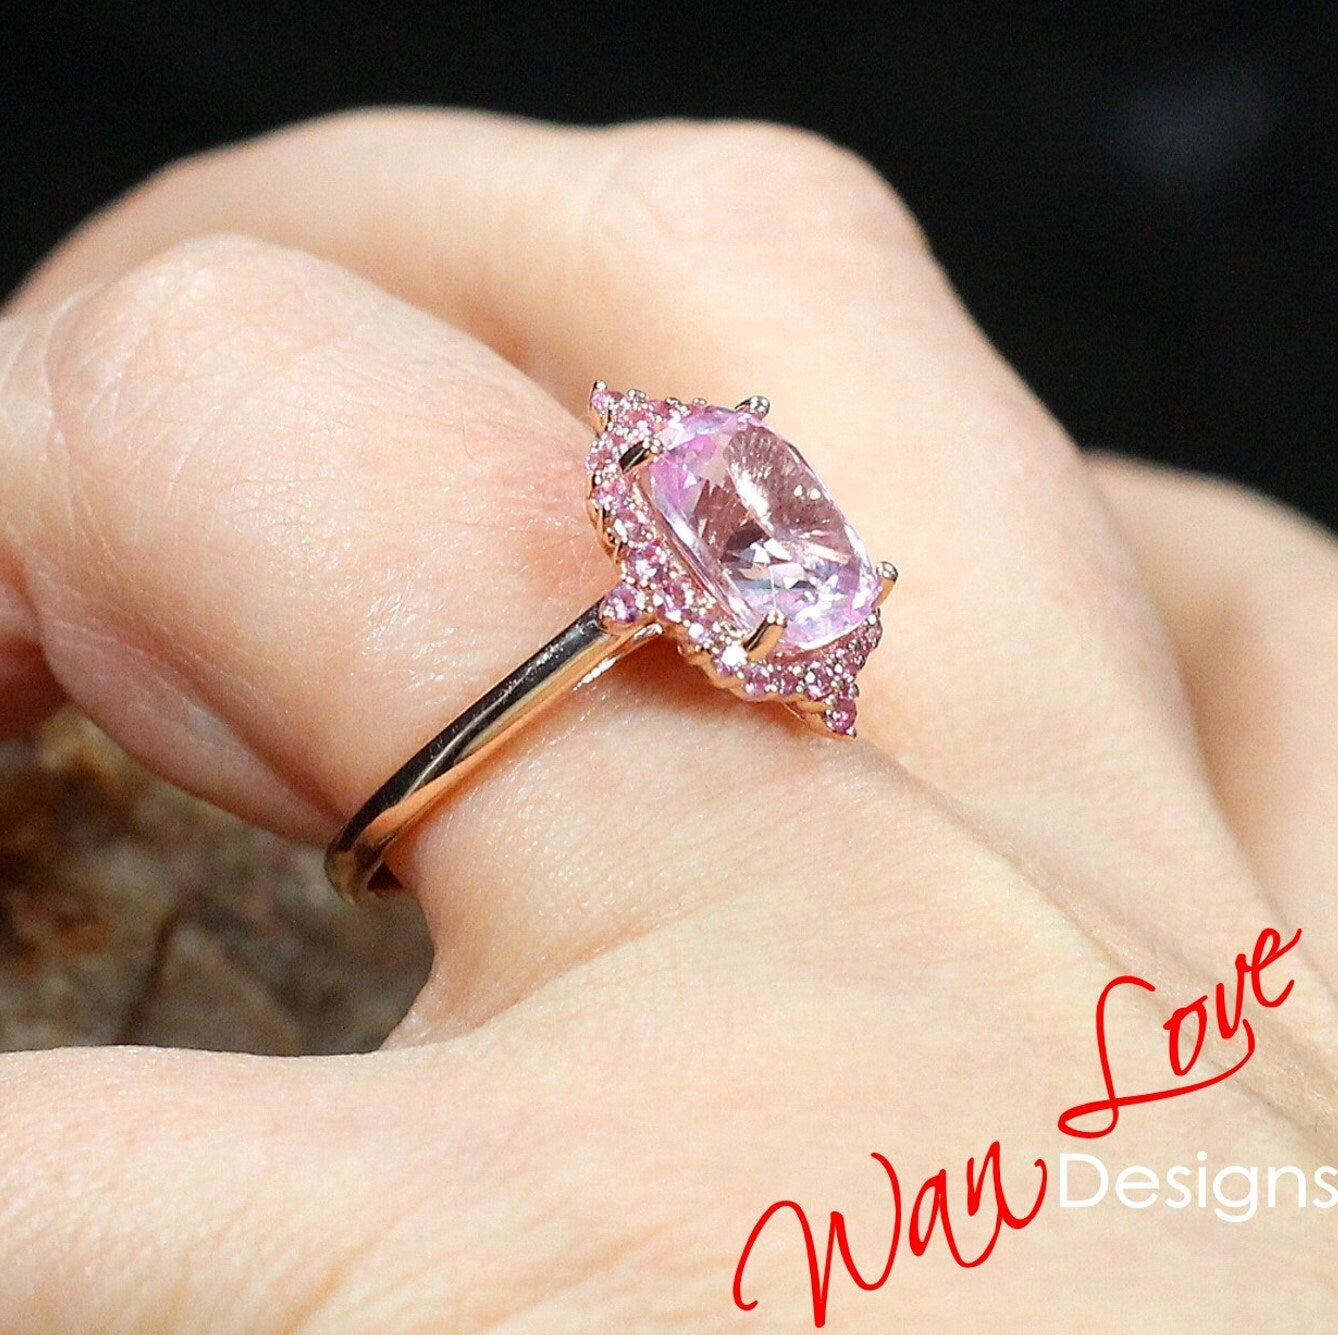 Light Pink Sapphire Elongated Cushion vintage engagement ring rose gold ring art deco ring Floral elongated cushion ring anniversary ring Wan Love Designs